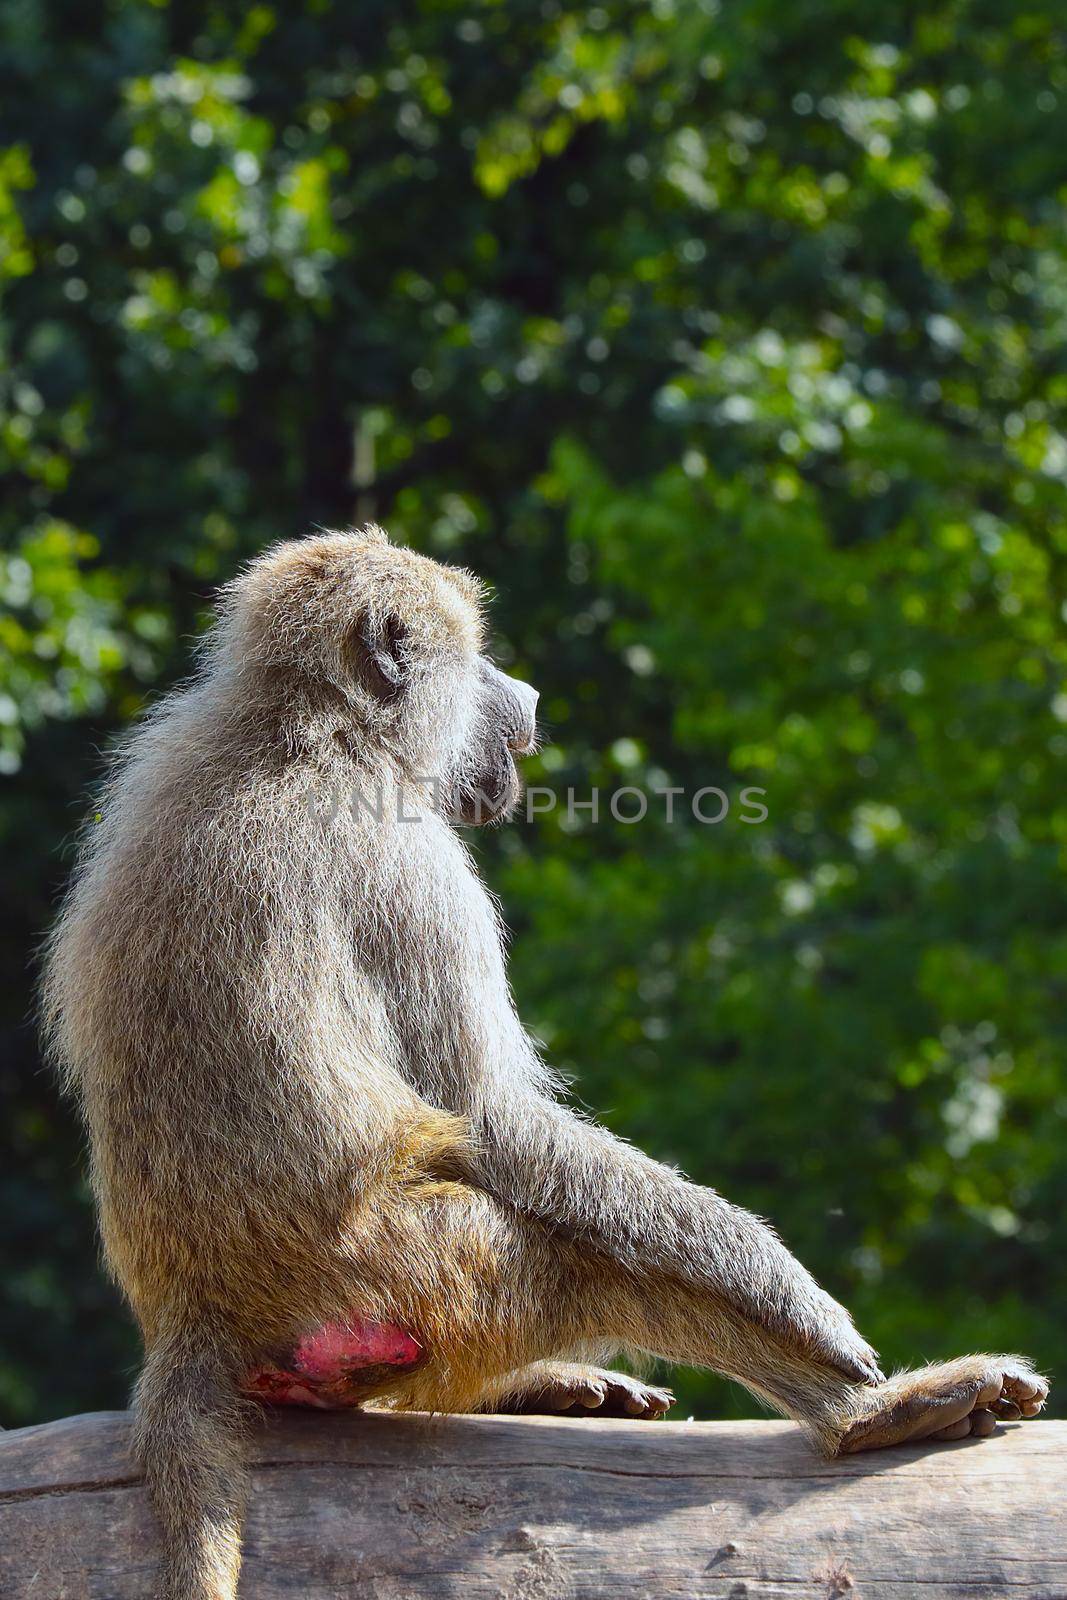 A macaque sits on a tree in the forest